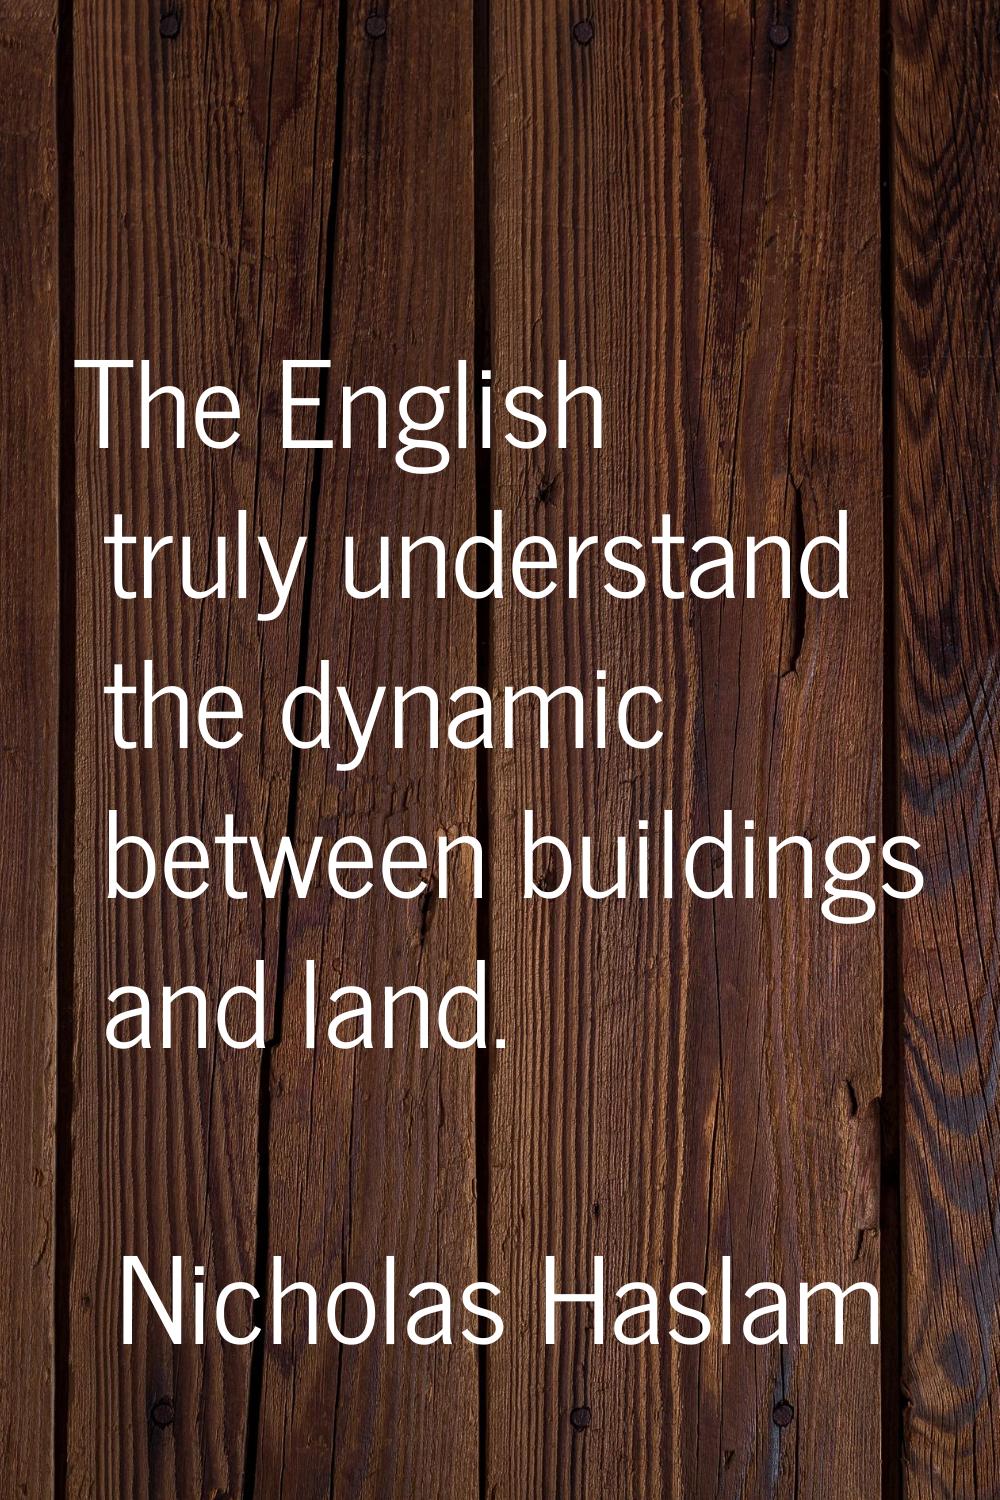 The English truly understand the dynamic between buildings and land.